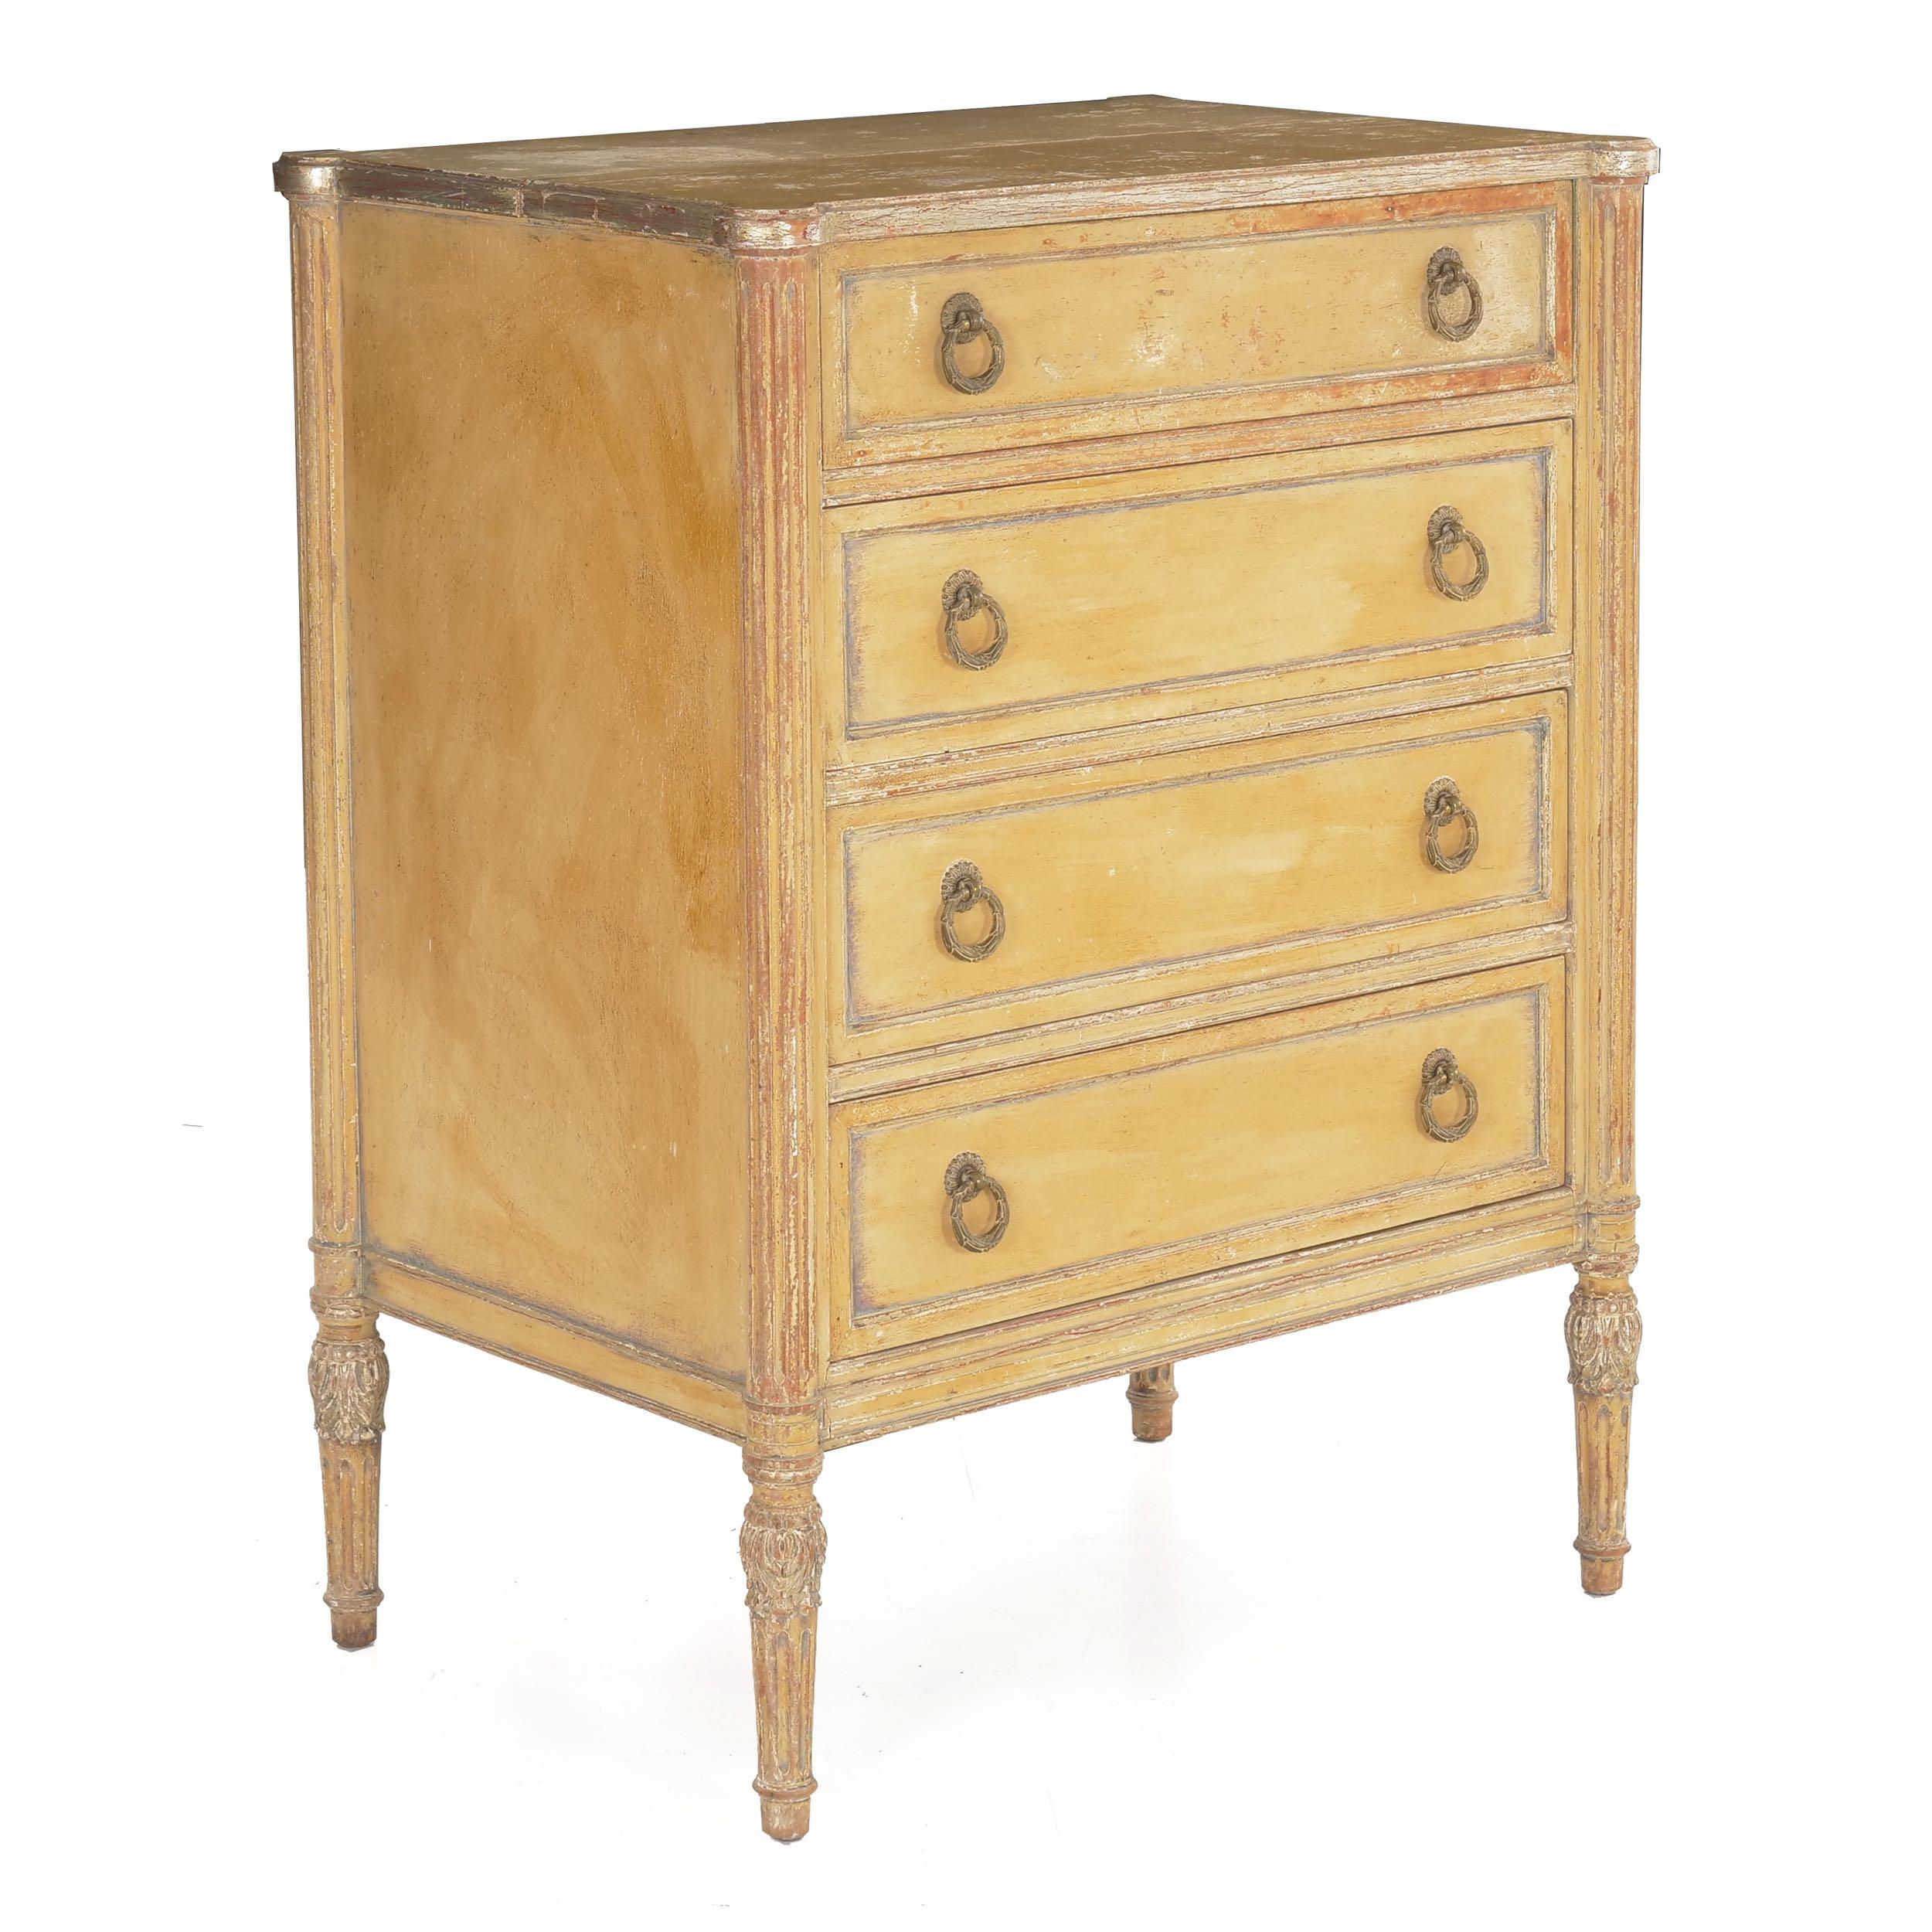 With a worn yellow painted surface with hints of red, brown and white beneath against sporadic silver highlights, this chest of drawers is a delightful piece that is both visually compelling and also incredibly useful. The top lifts to reveal a tidy